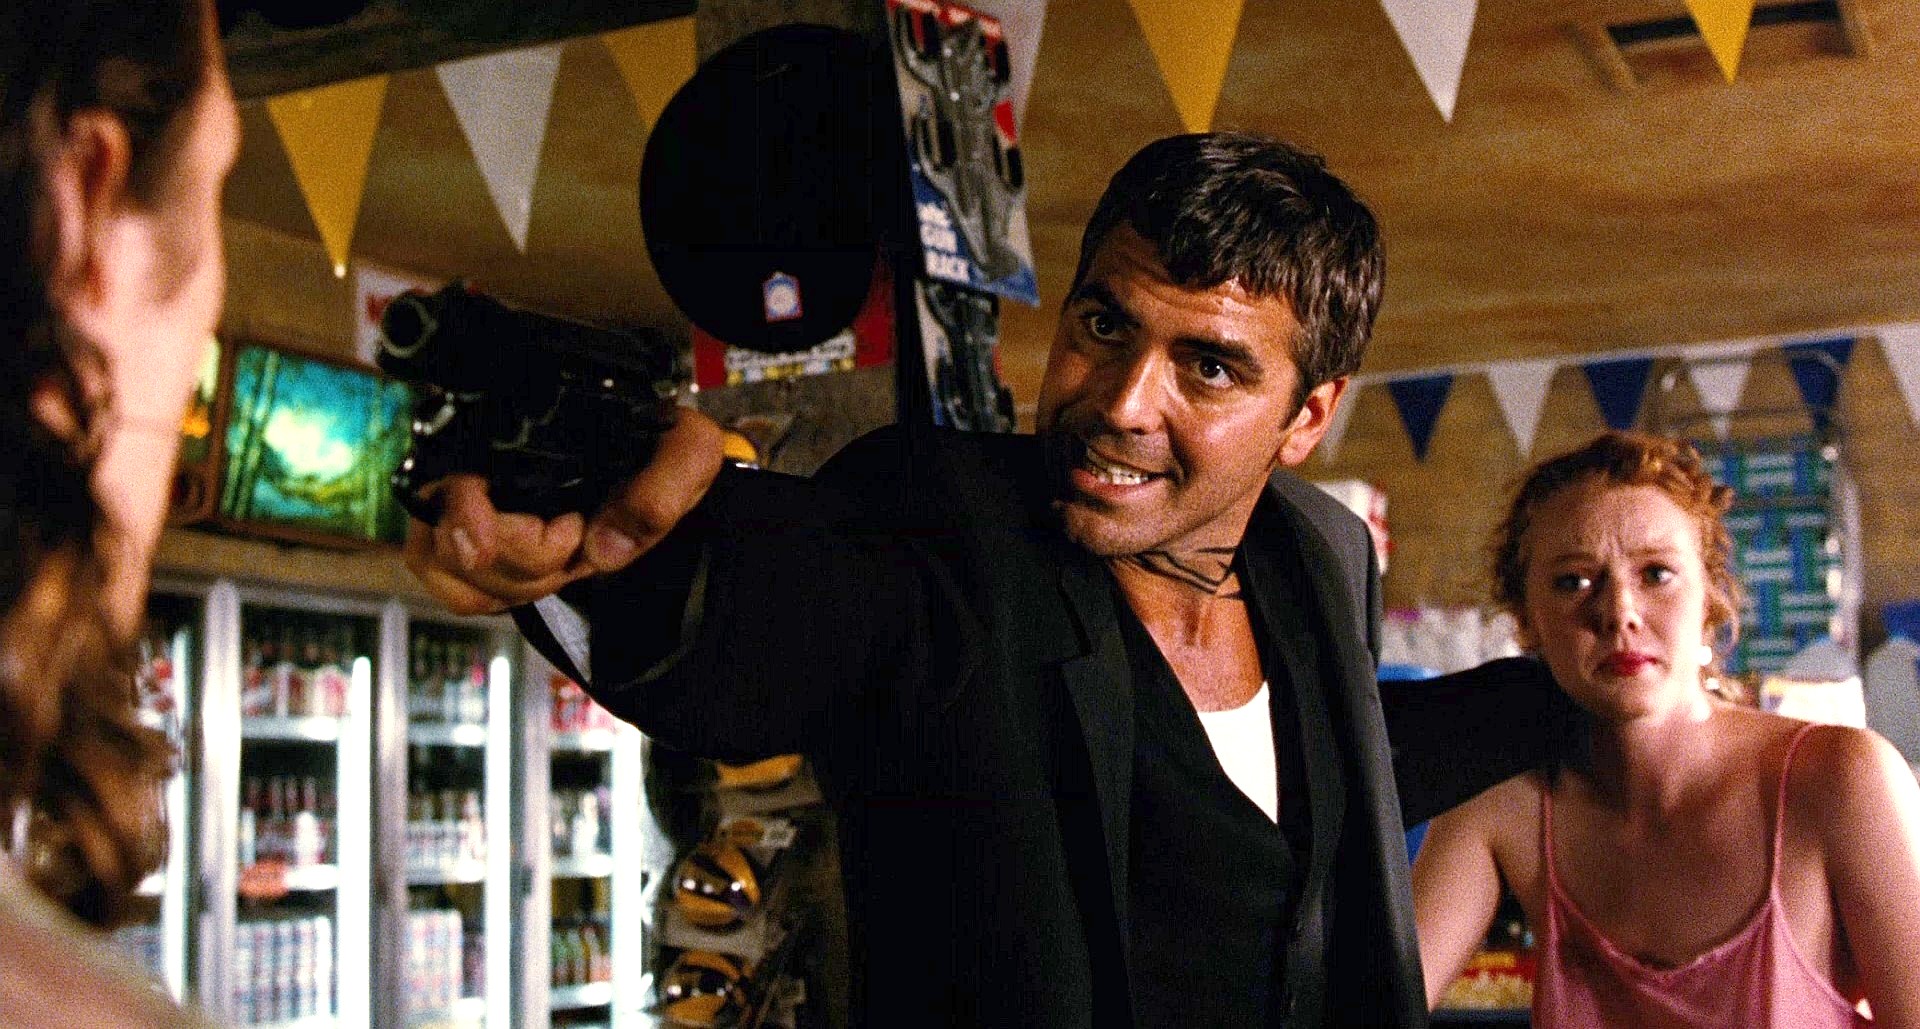 From Dusk Till Dawn was an interesting film that also managed to mix genres and shock viewers with its over the top plot twists.